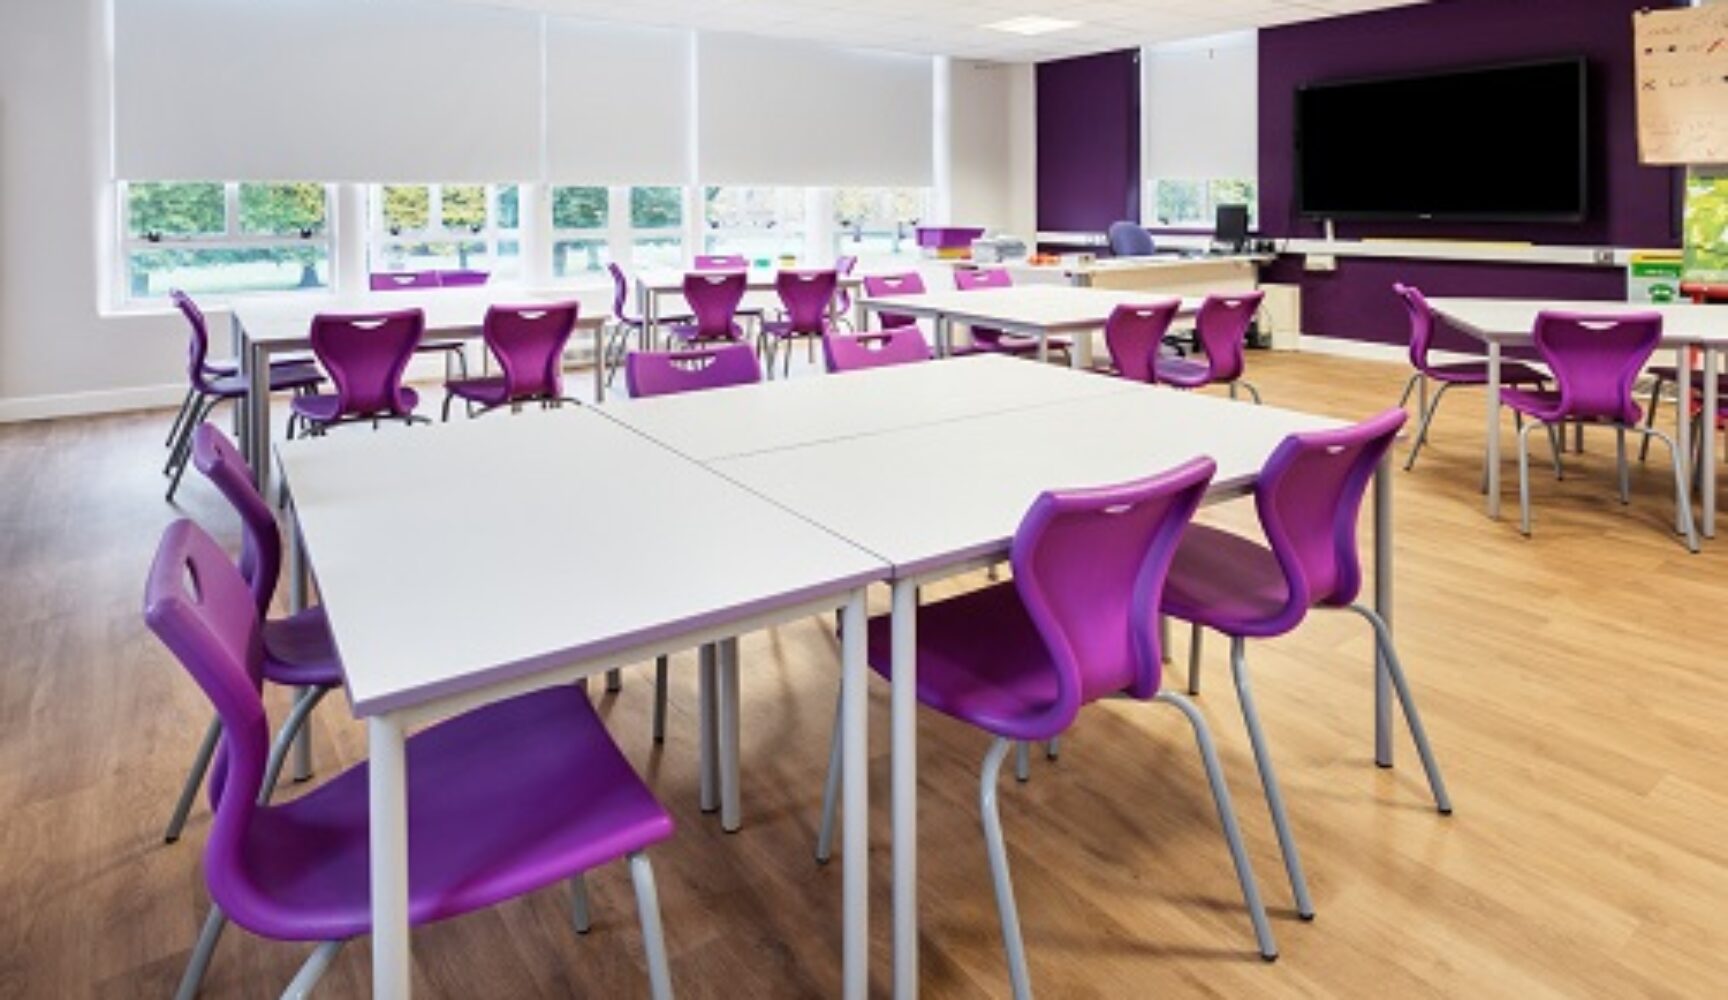 Clean new classroom with purple furniture accents